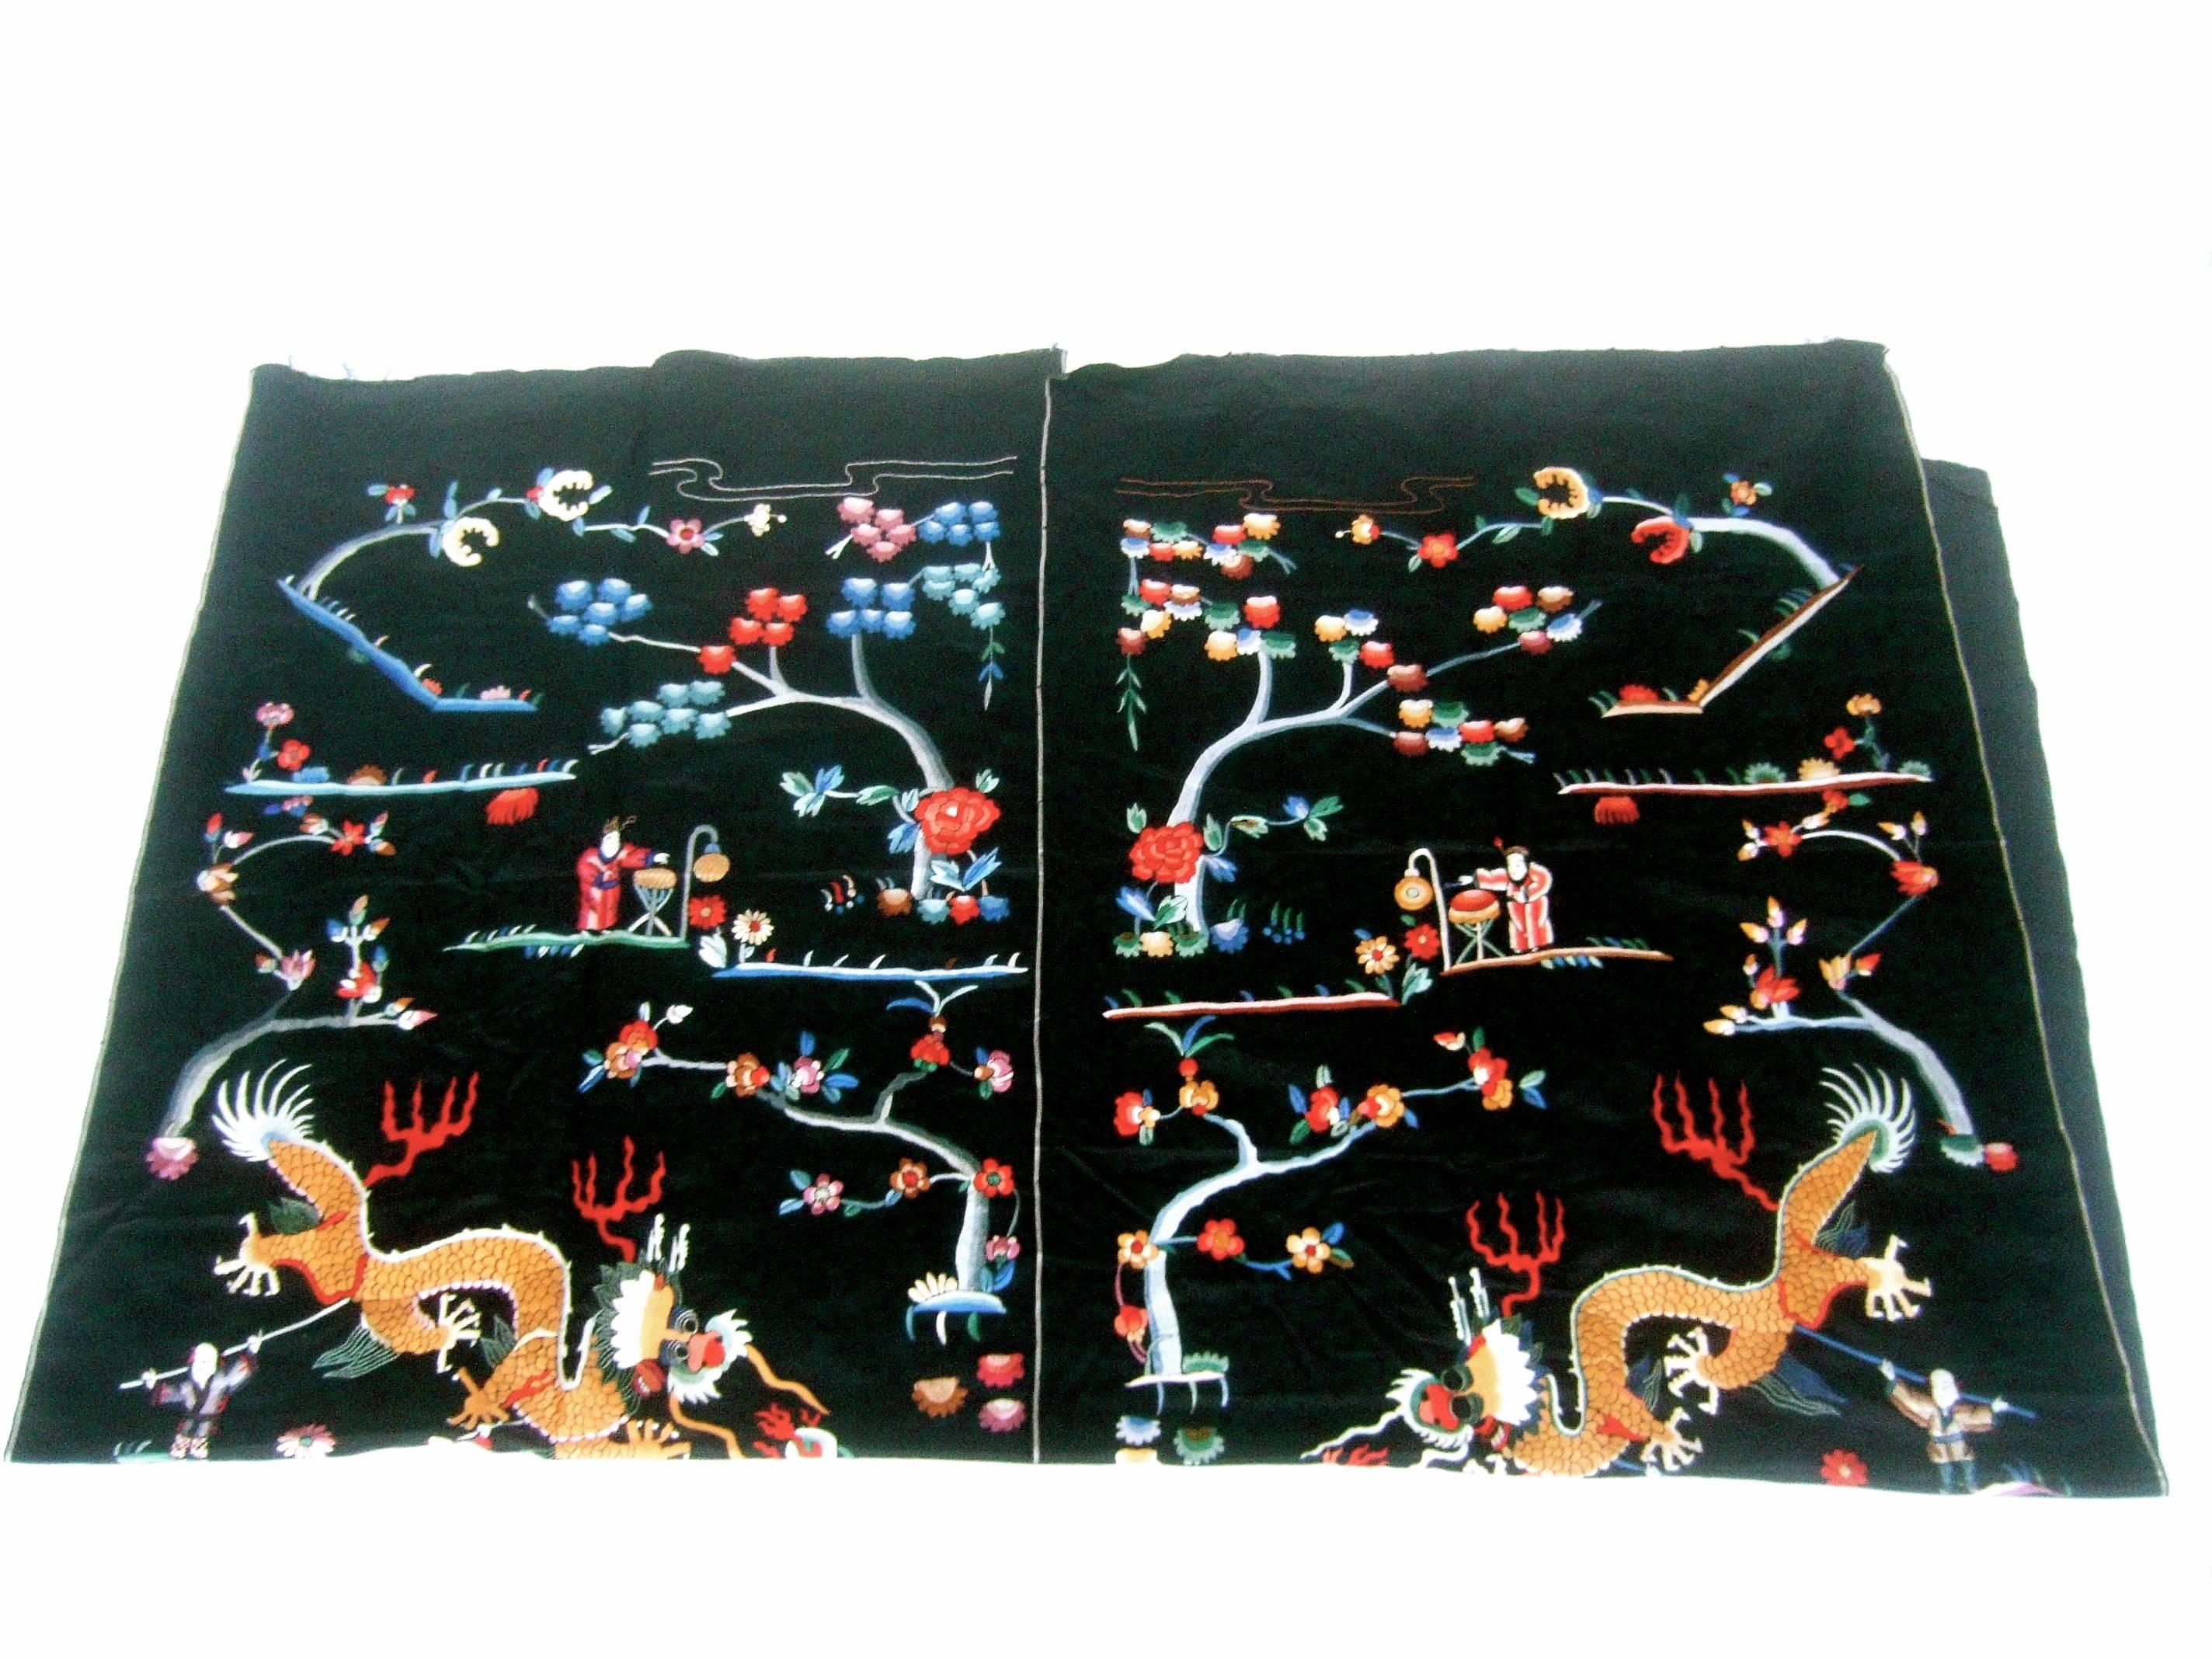 Exotic Embroidered Asian Theme Pair of Satin Fabric Panels c 1970s  4